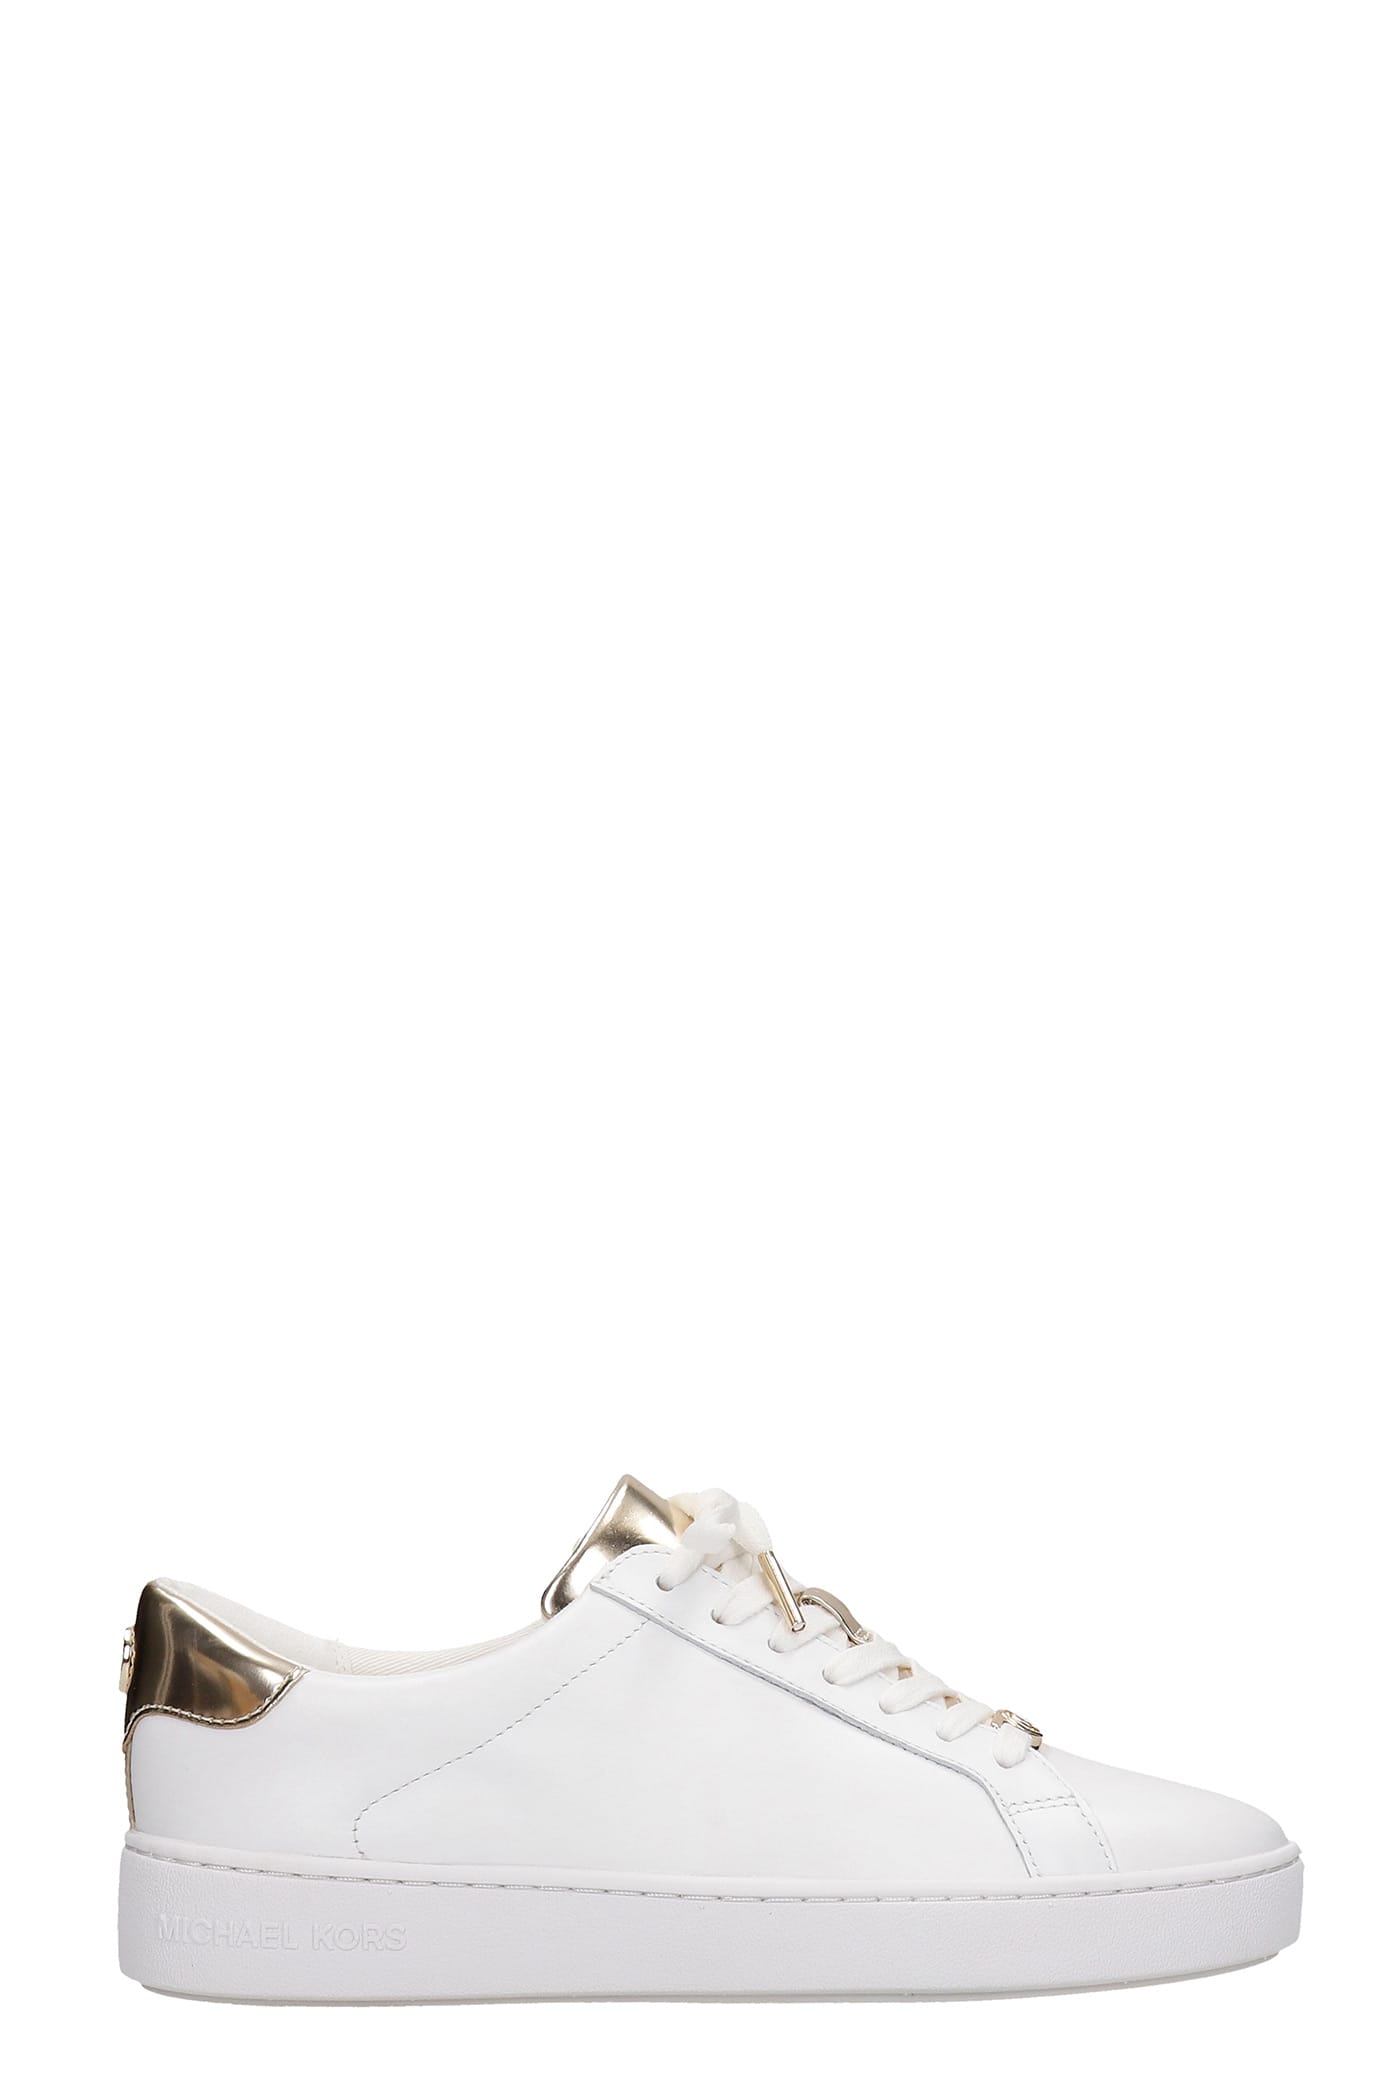 MICHAEL Michael Kors Irving Sneakers In White Leather